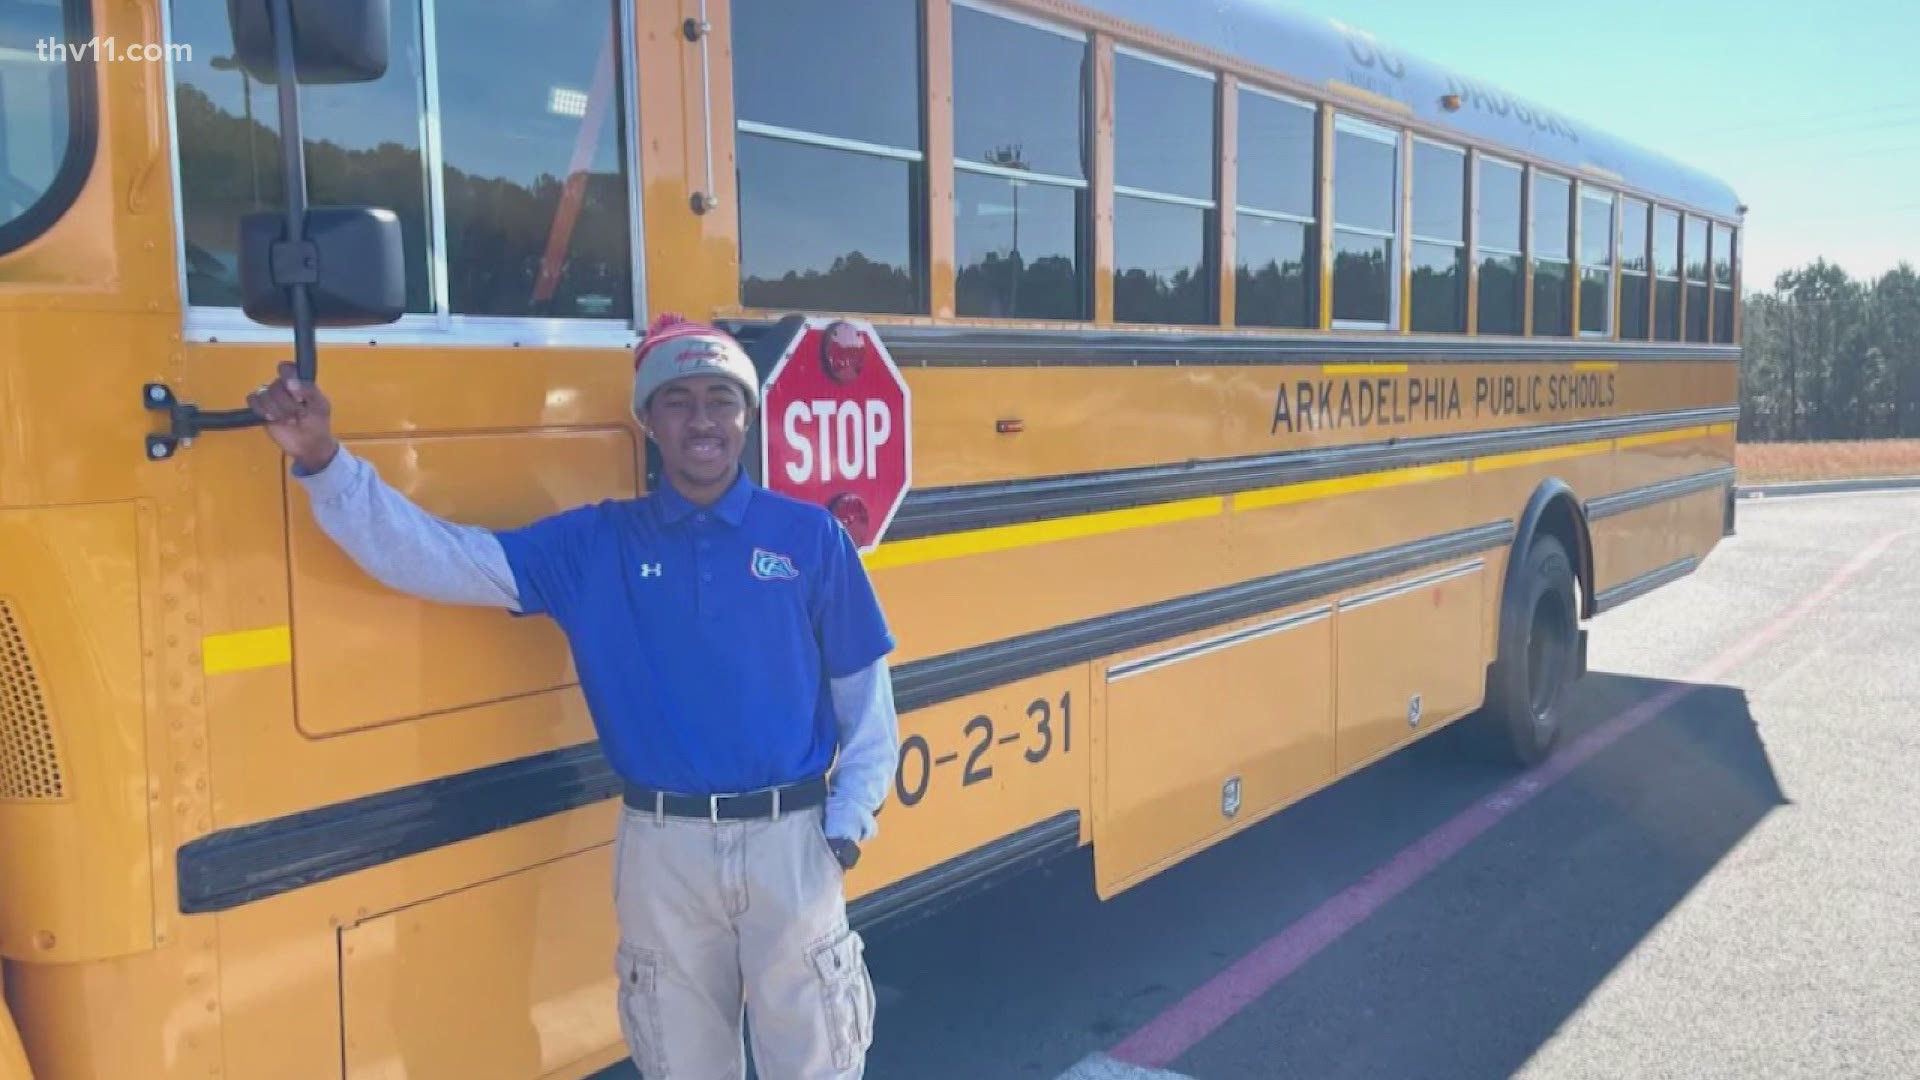 When you think of bus drivers you might imagine someone older, maybe a retiree. But one teen is breaking that mold and he hopes his peers will follow him.